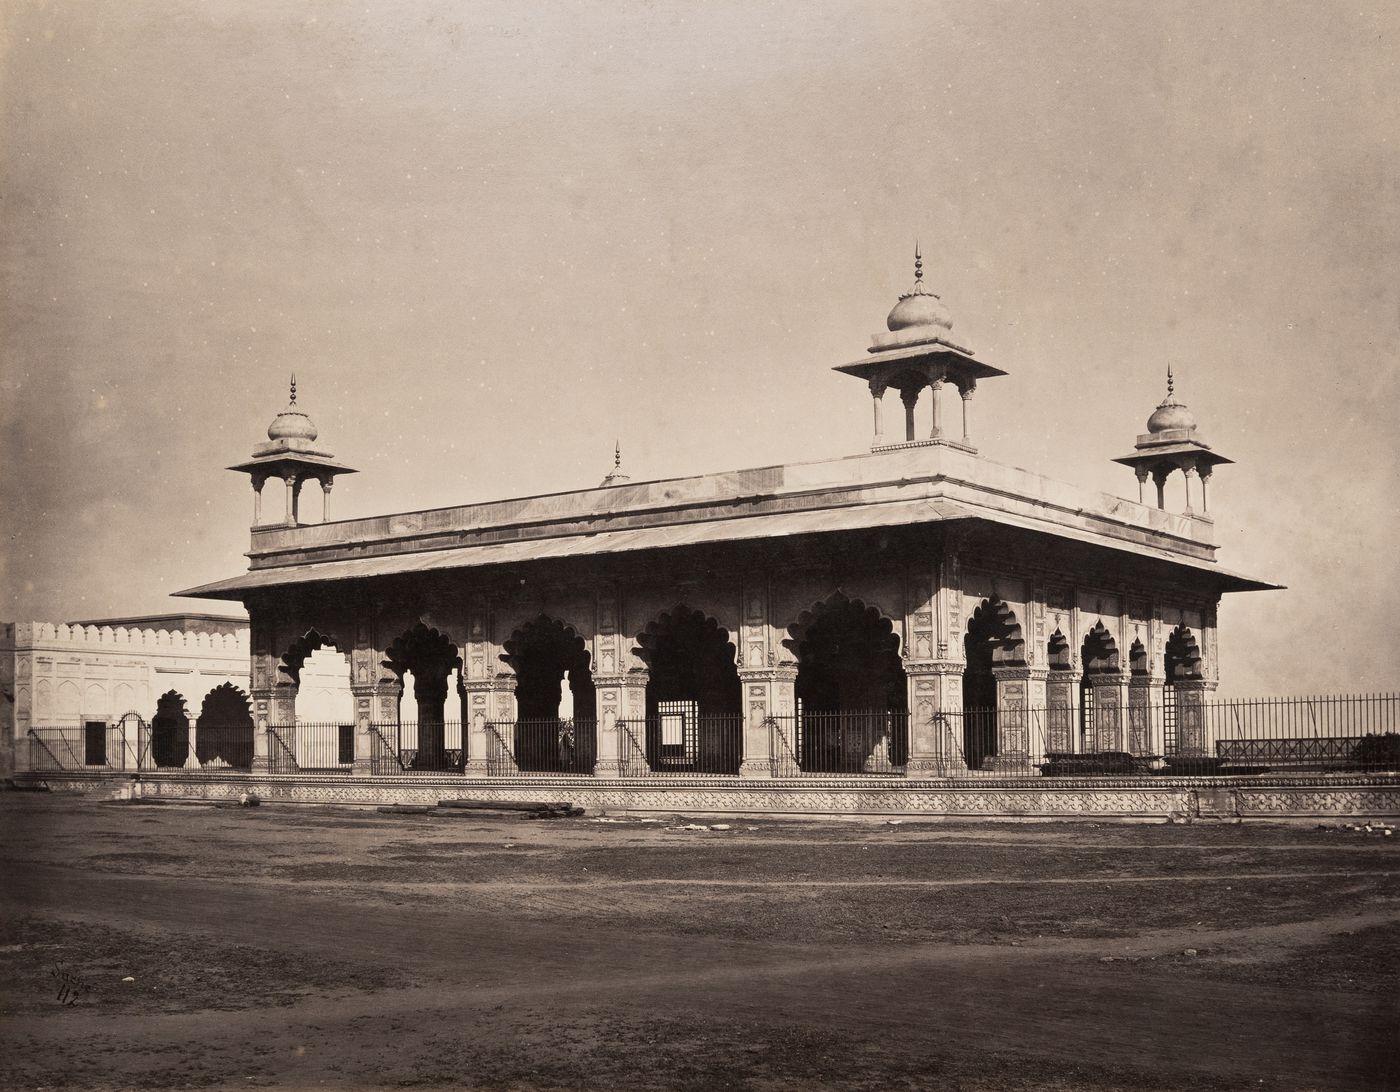 View of the Diwan-i Khas [Private Audience Hall] (also known as the Daulat Khana-i-Khass), Shahjahanabad (now Lal Qila or Red Fort), Delhi, India